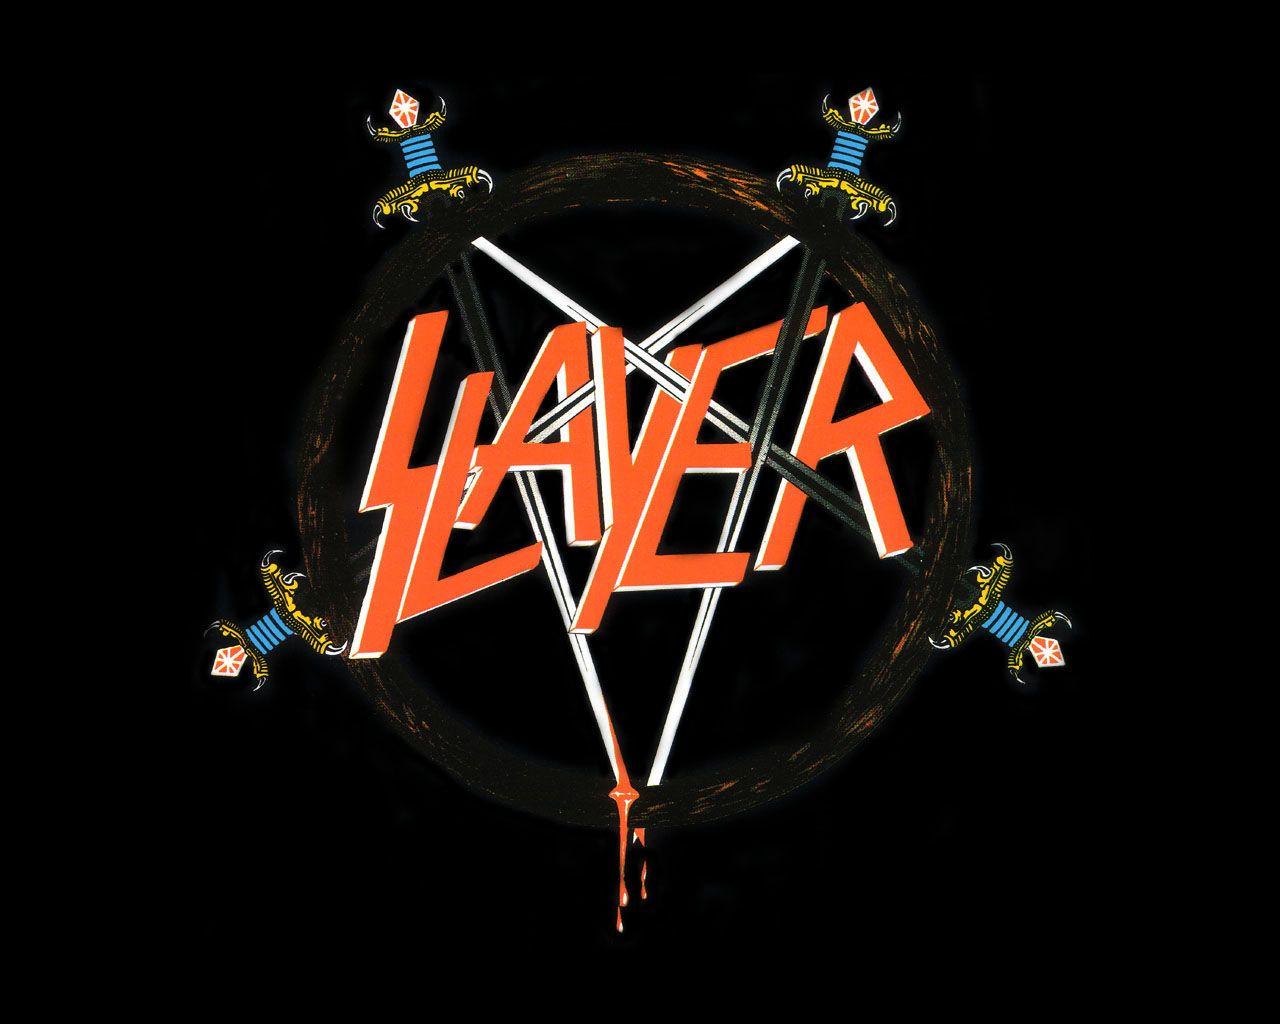 Slayer Download HD Wallpaper and Free Image